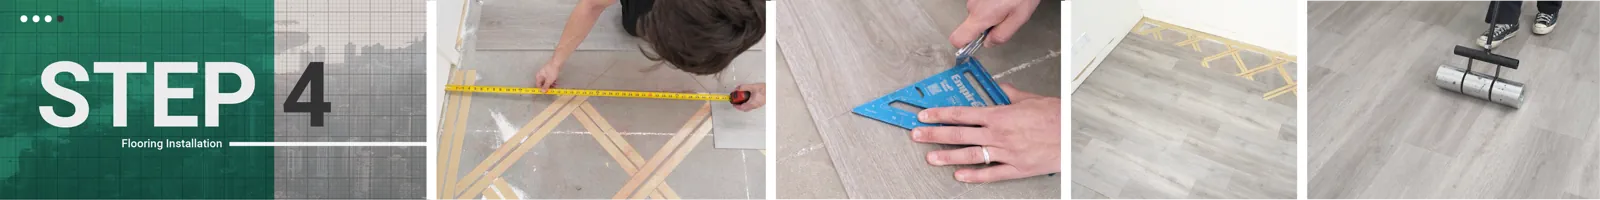 Collage of images demonstrating the process to install InstaGrip LooseLay Vinyl Flooring: measure last plank size, use square to score and snap flooring, repeat for each row, finish with the 75lb roller on the installed flooring.